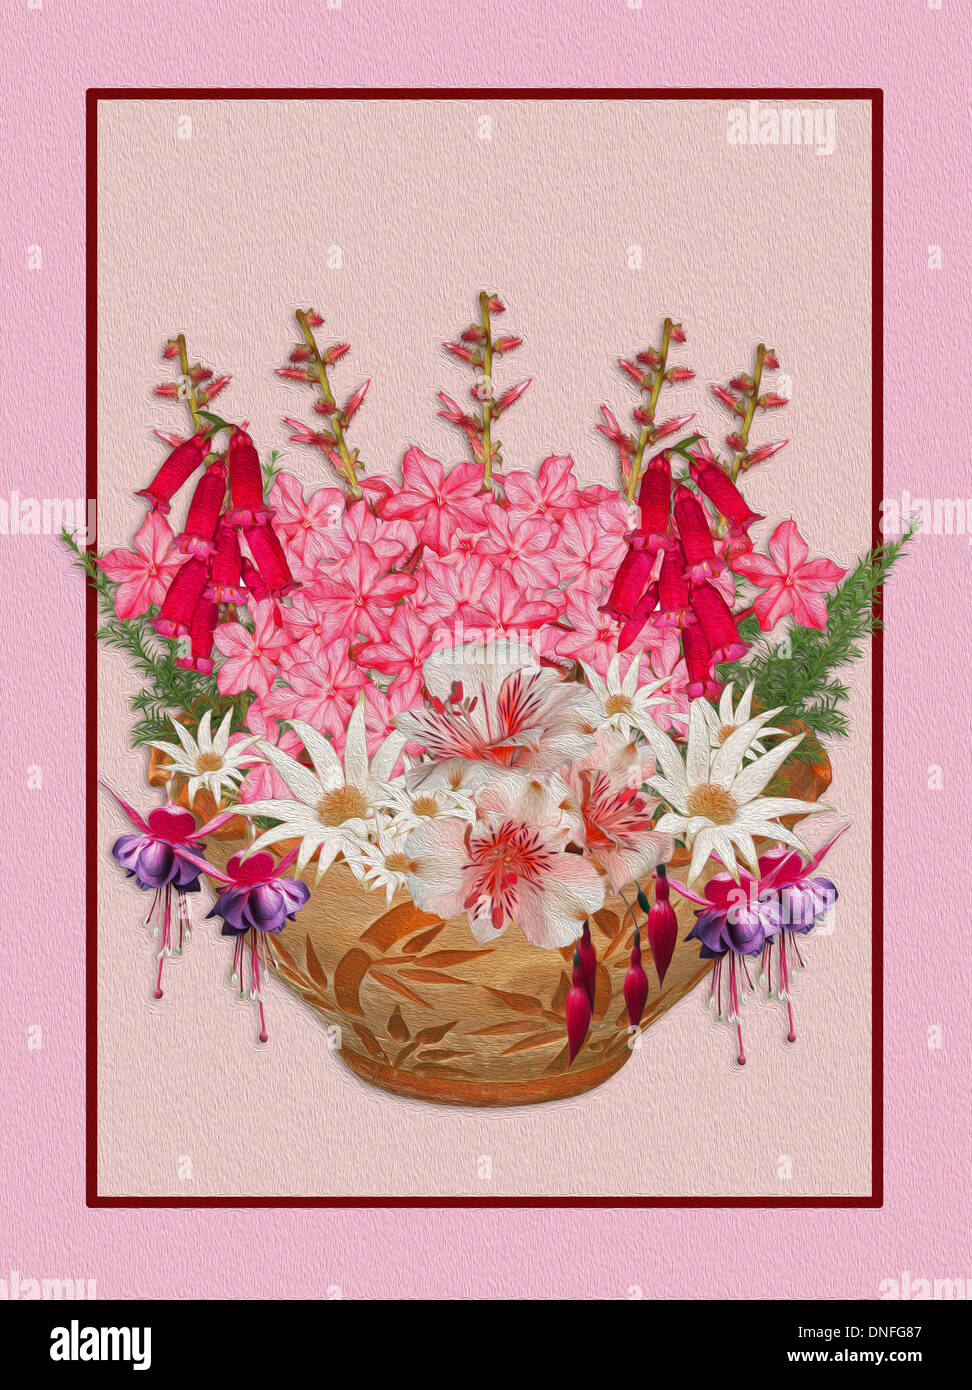 Unique floral art with pink plumbago flowers, white daisies, purple fuchsias, and alstroemerias in decorative terracotta pot on pale pink background Stock Photo